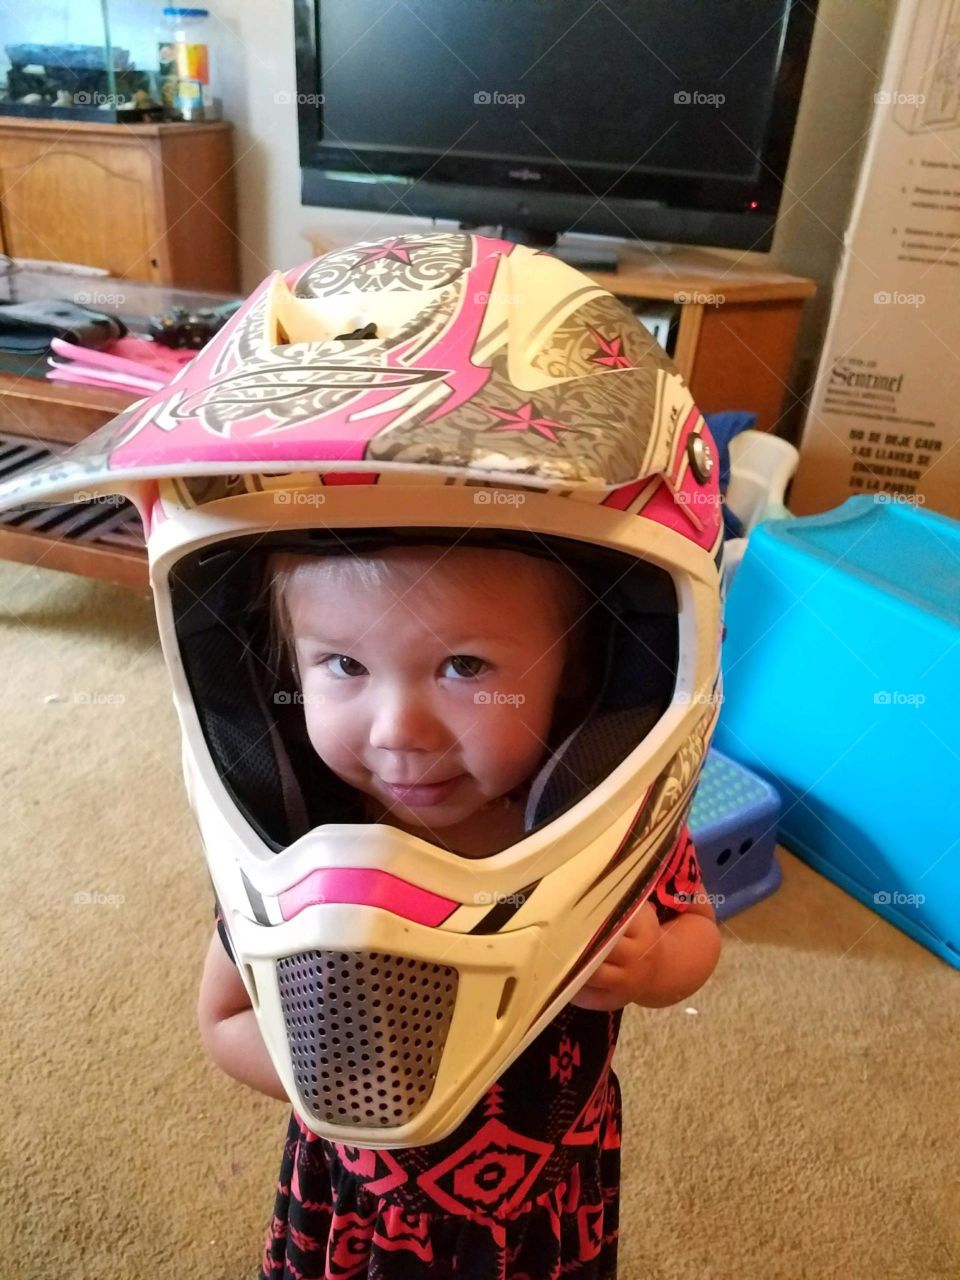 My adorable daughter this little girl trying on a helmet that is way too big for her but she wants to ride four-wheelers in Vidor Texas United States of America 2017